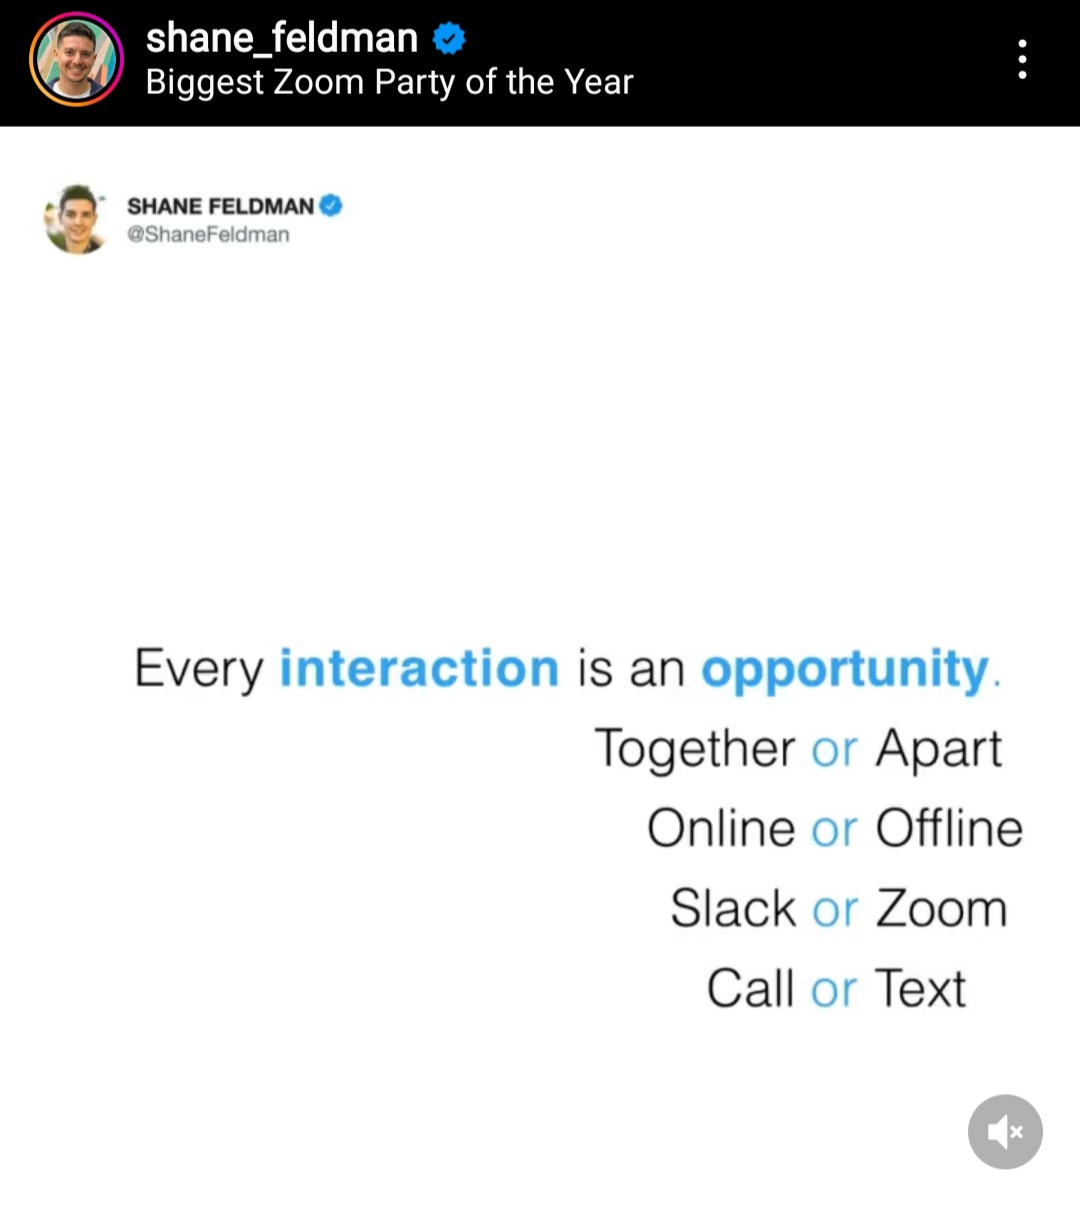 Every interaction is an opportunity. Together or apart. Online or offline. Slack or zoom. Call or text. Shane Feldman, coaching tip